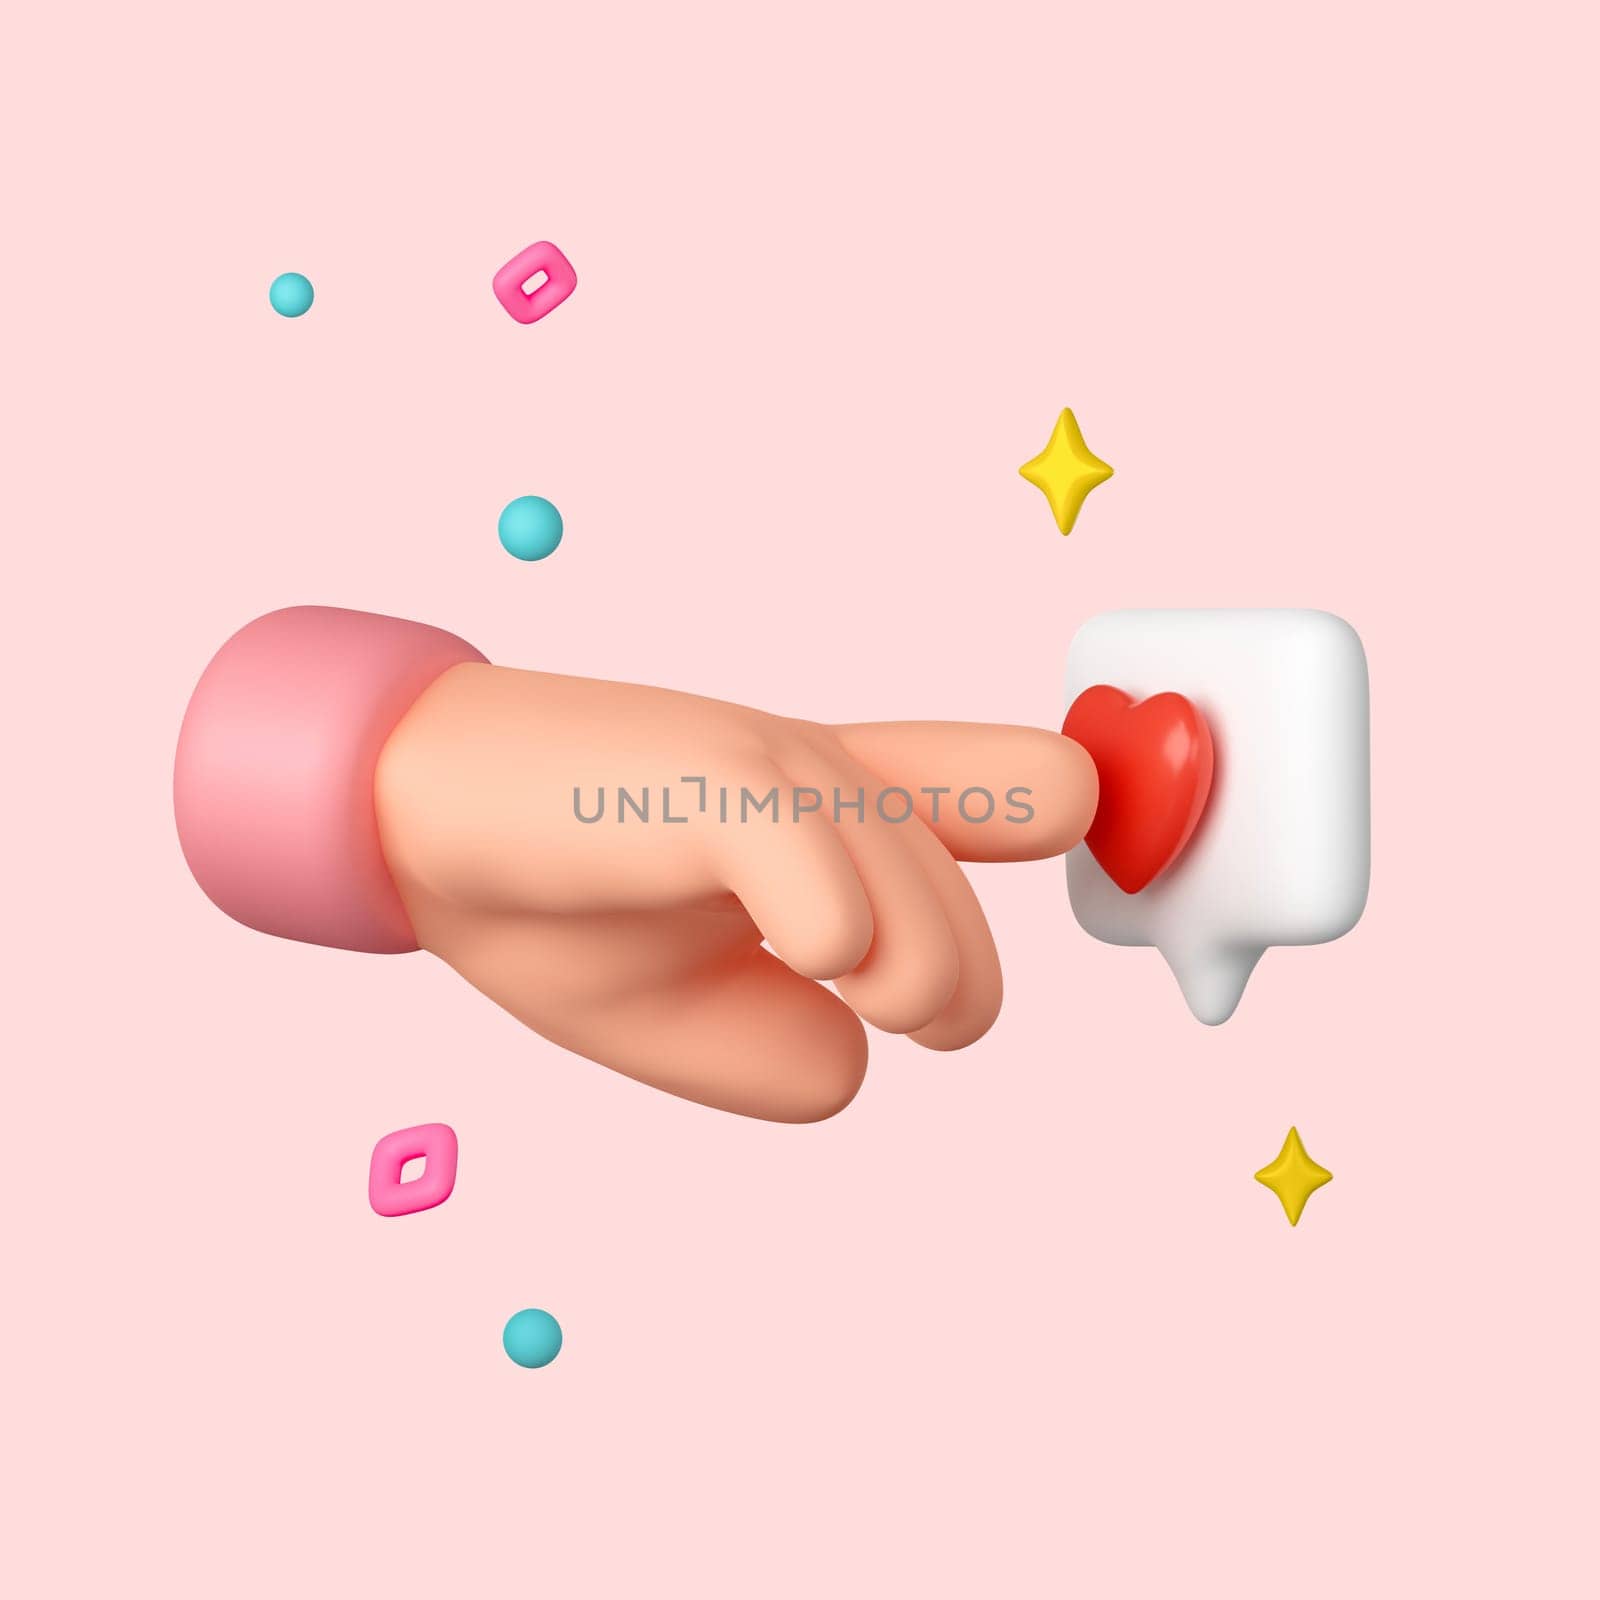 3D Hand finger presses on like button. Social media marketing concept. Notification like icon. Social network app. Cartoon creative design illustration isolated on white background with clipping path. 3D render illustration by meepiangraphic